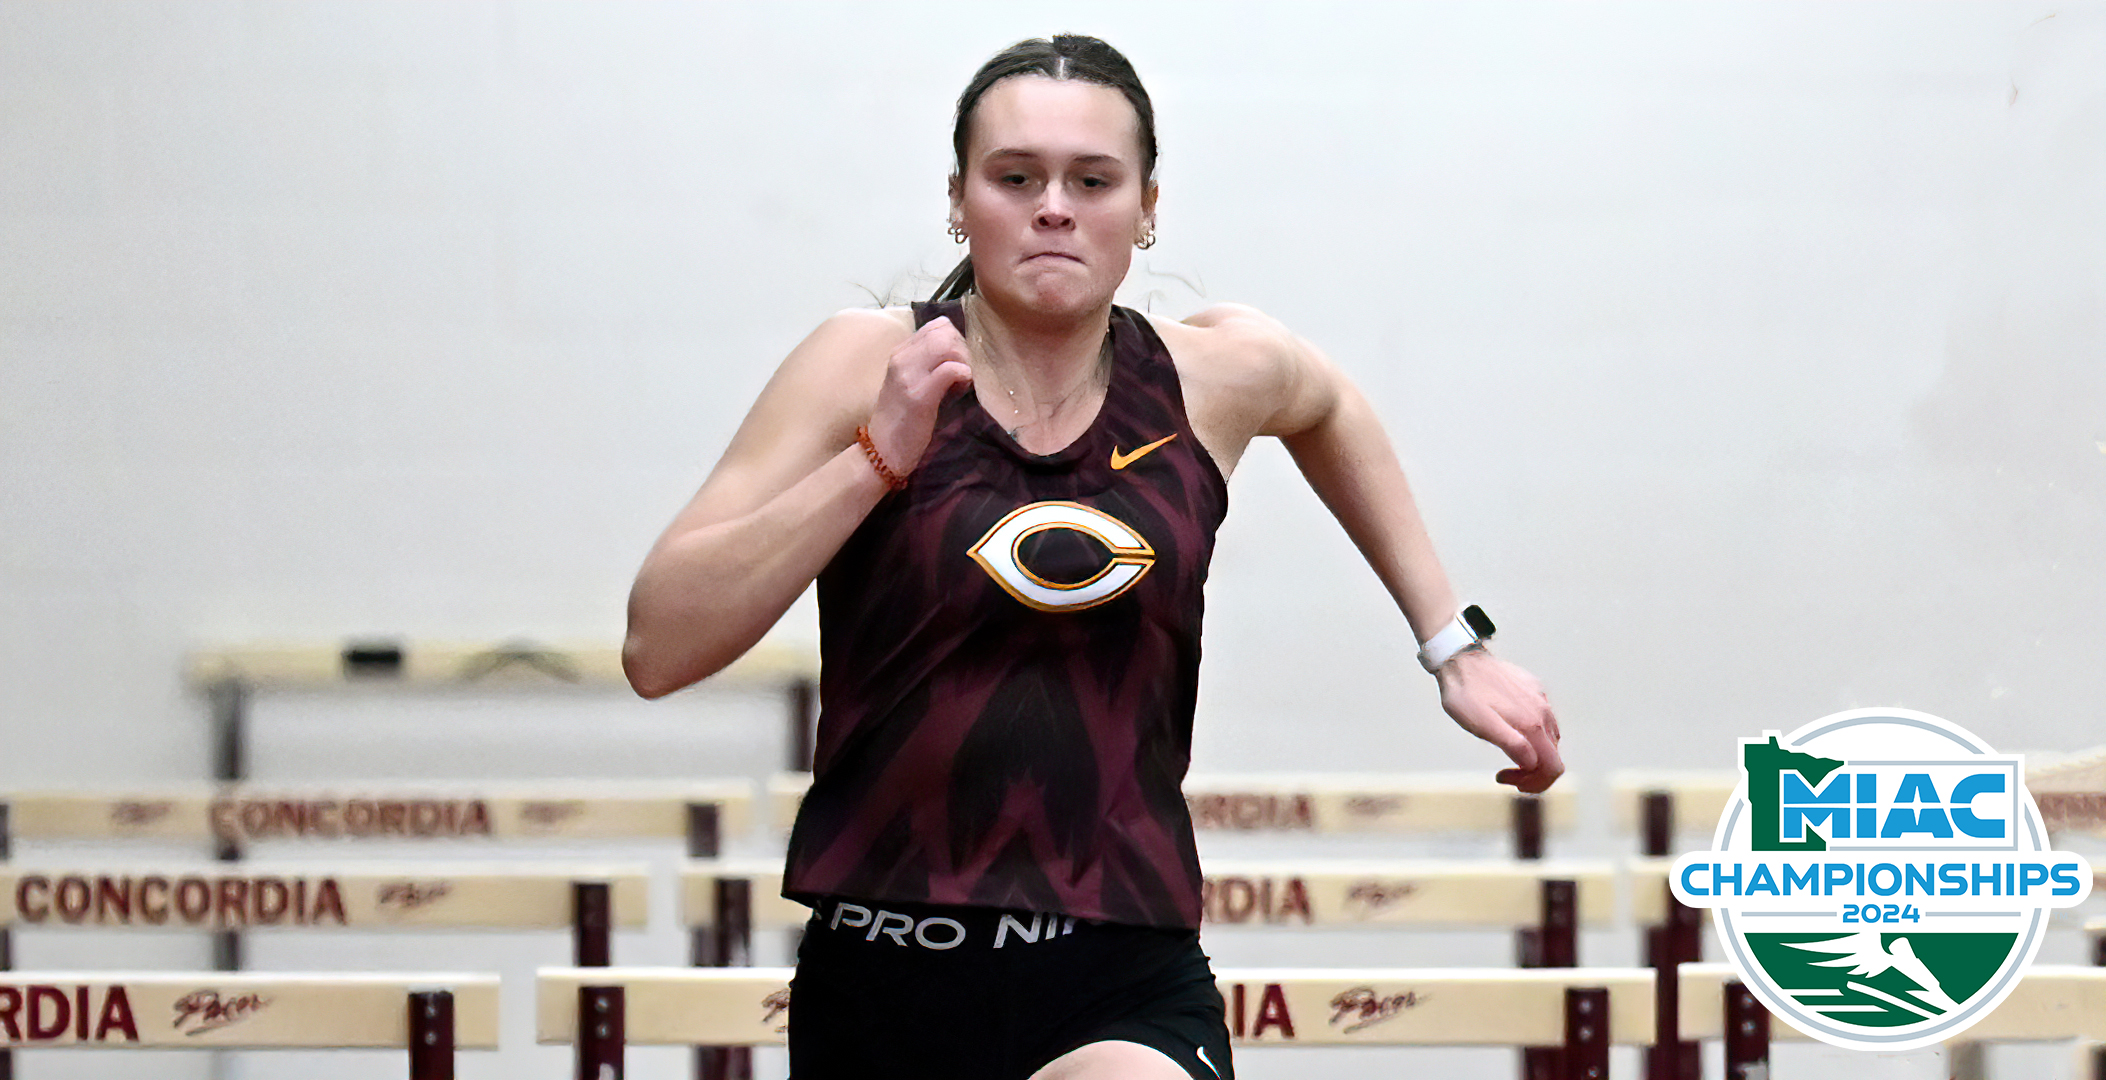 Junior Jenna Kalevik broke the day-old school record in the 60-meter hurdles on Day 1 of the MIAC Indoor Championship Meet.